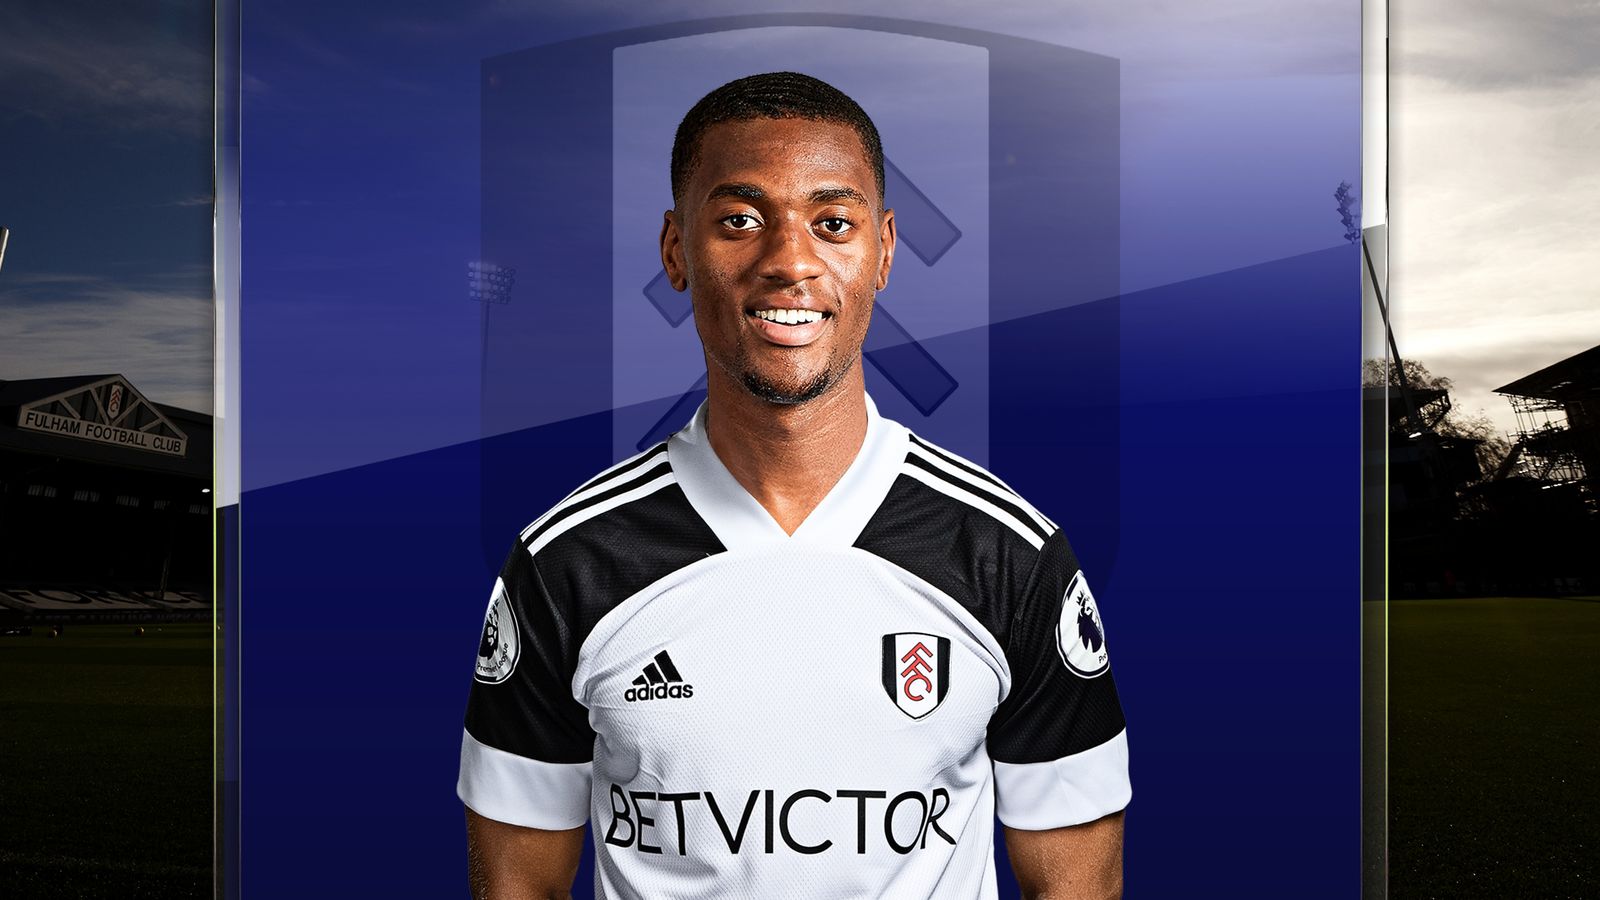  Tosin Adarabioyo, a Fulham Football Club player, is posing in his team's jersey, smiling at the camera, with a stadium in the background.